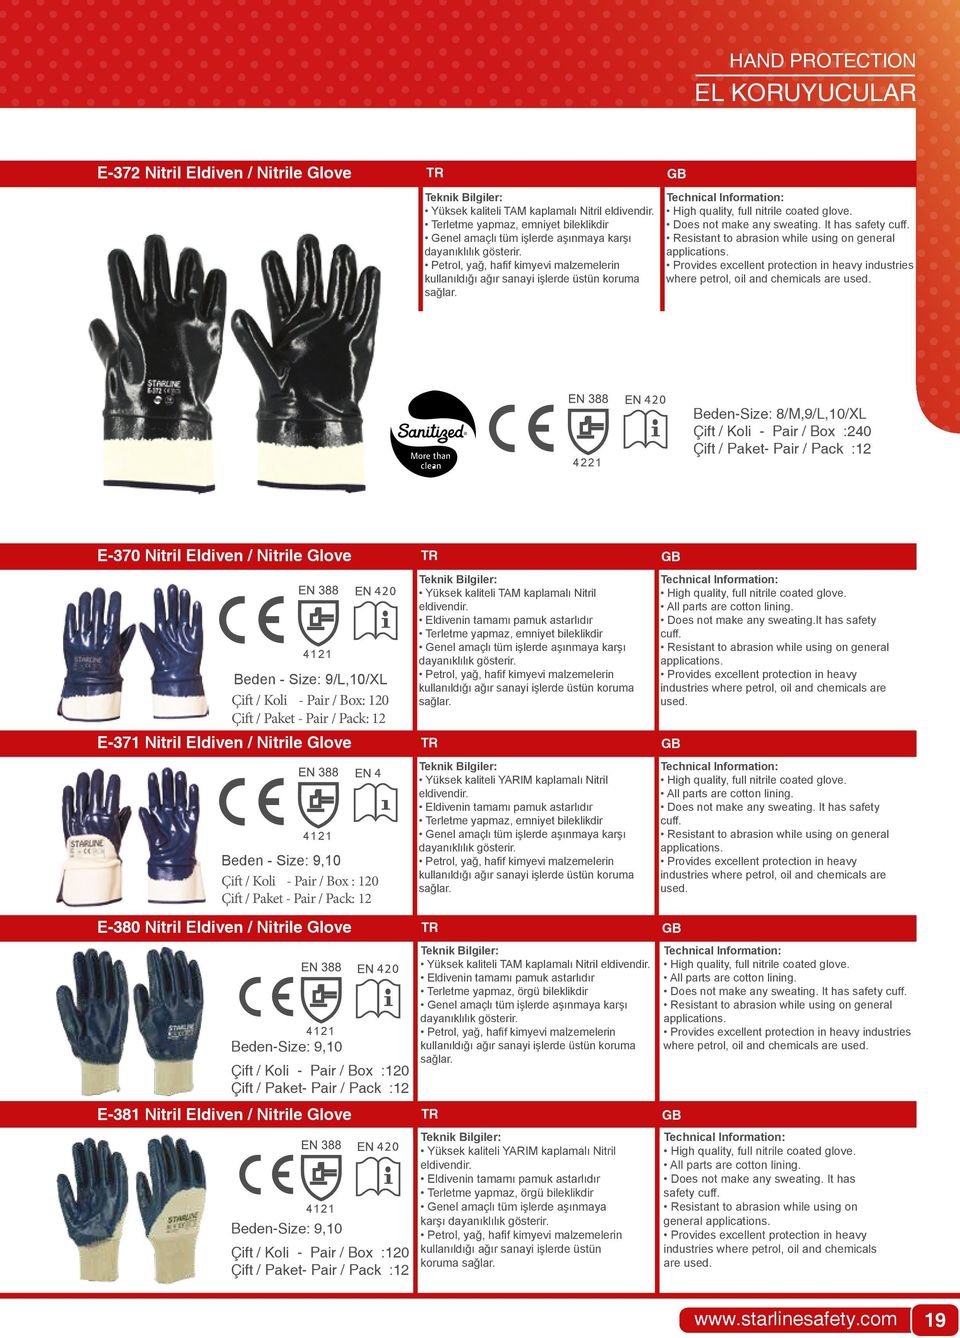 High quality, full nitrile coated glove. Does not make any sweating. It has safety cuff. Resistant to abrasion while using on general applications.